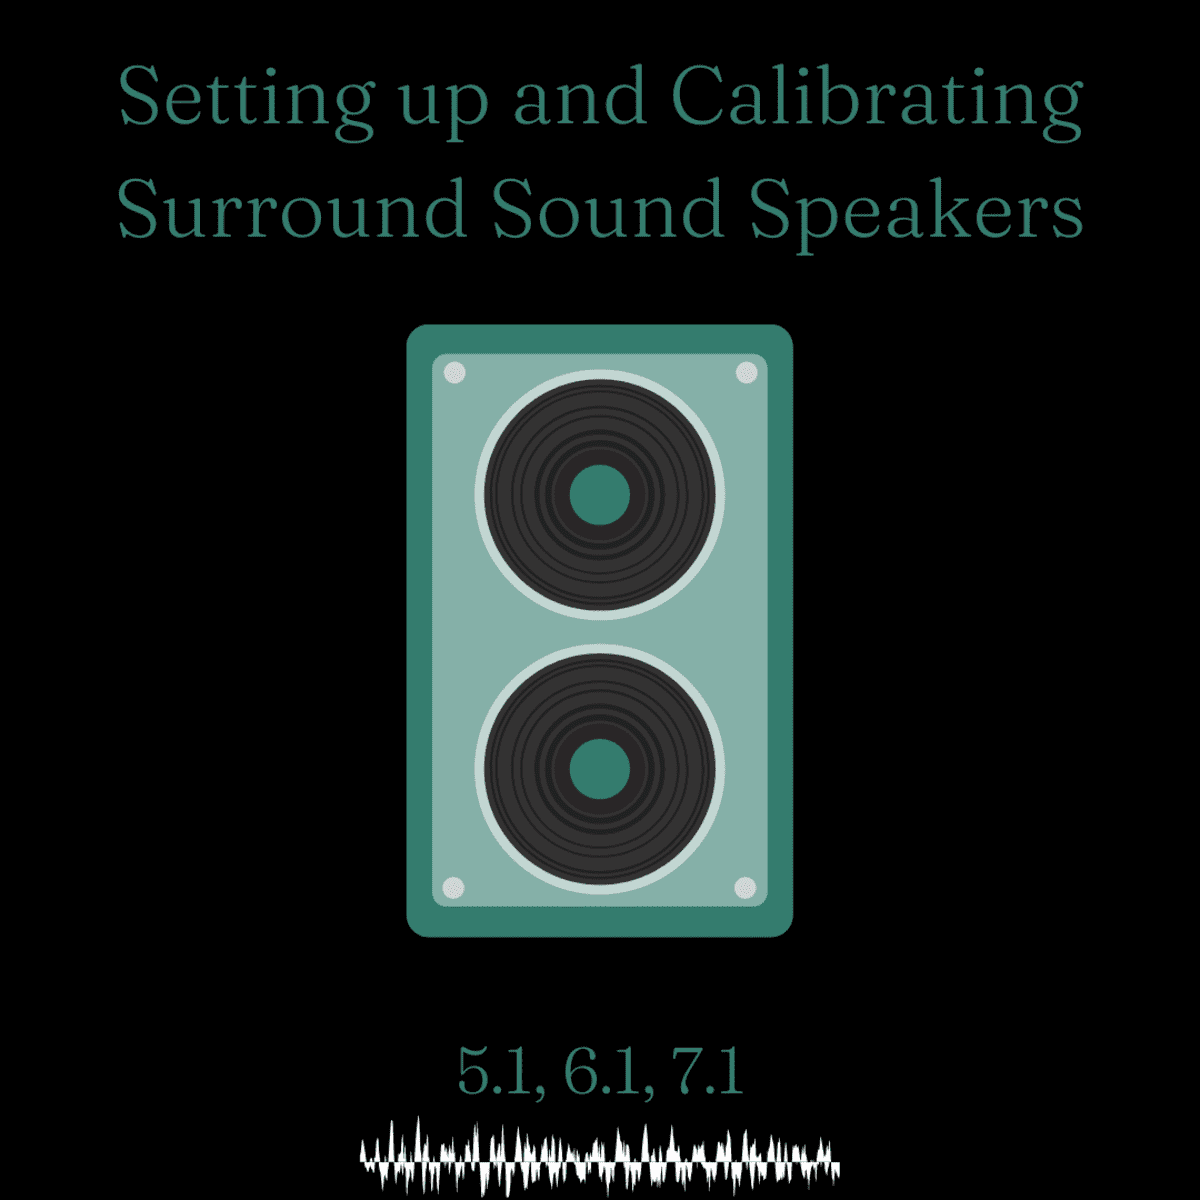 How to Set up and Calibrate Surround Sound Speaker Systems (5.1